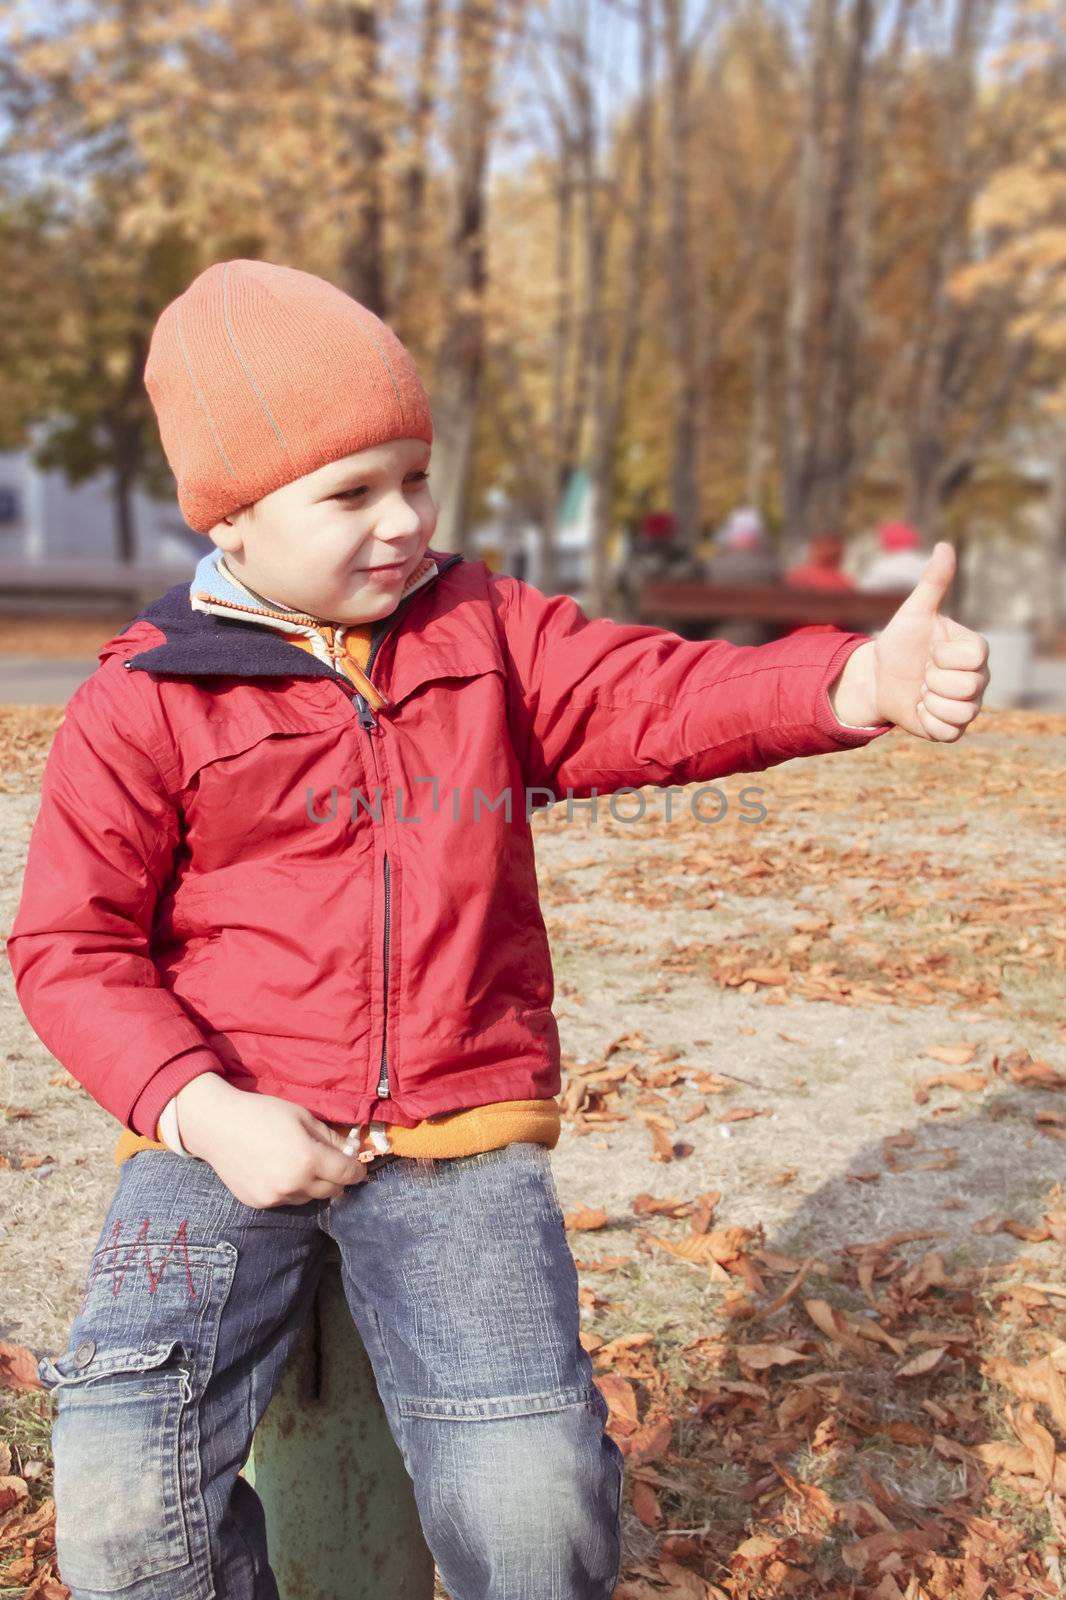 Happy kid shows up finger, sitting in autumn park